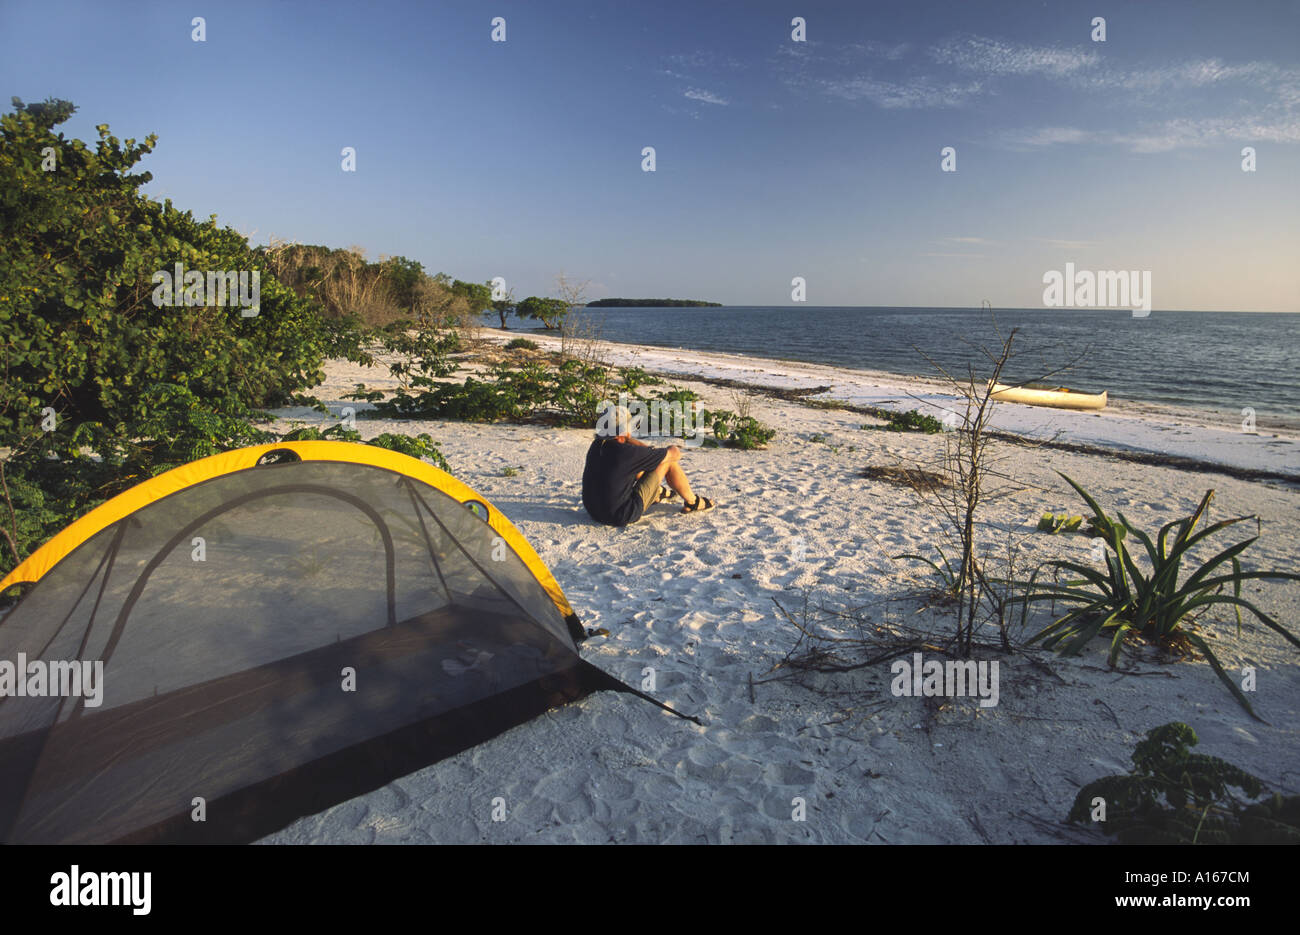 Canoeist camping on beach at Picnic Key in Ten Thousand Islands area in Everglades National Park, Florida, USA Stock Photo